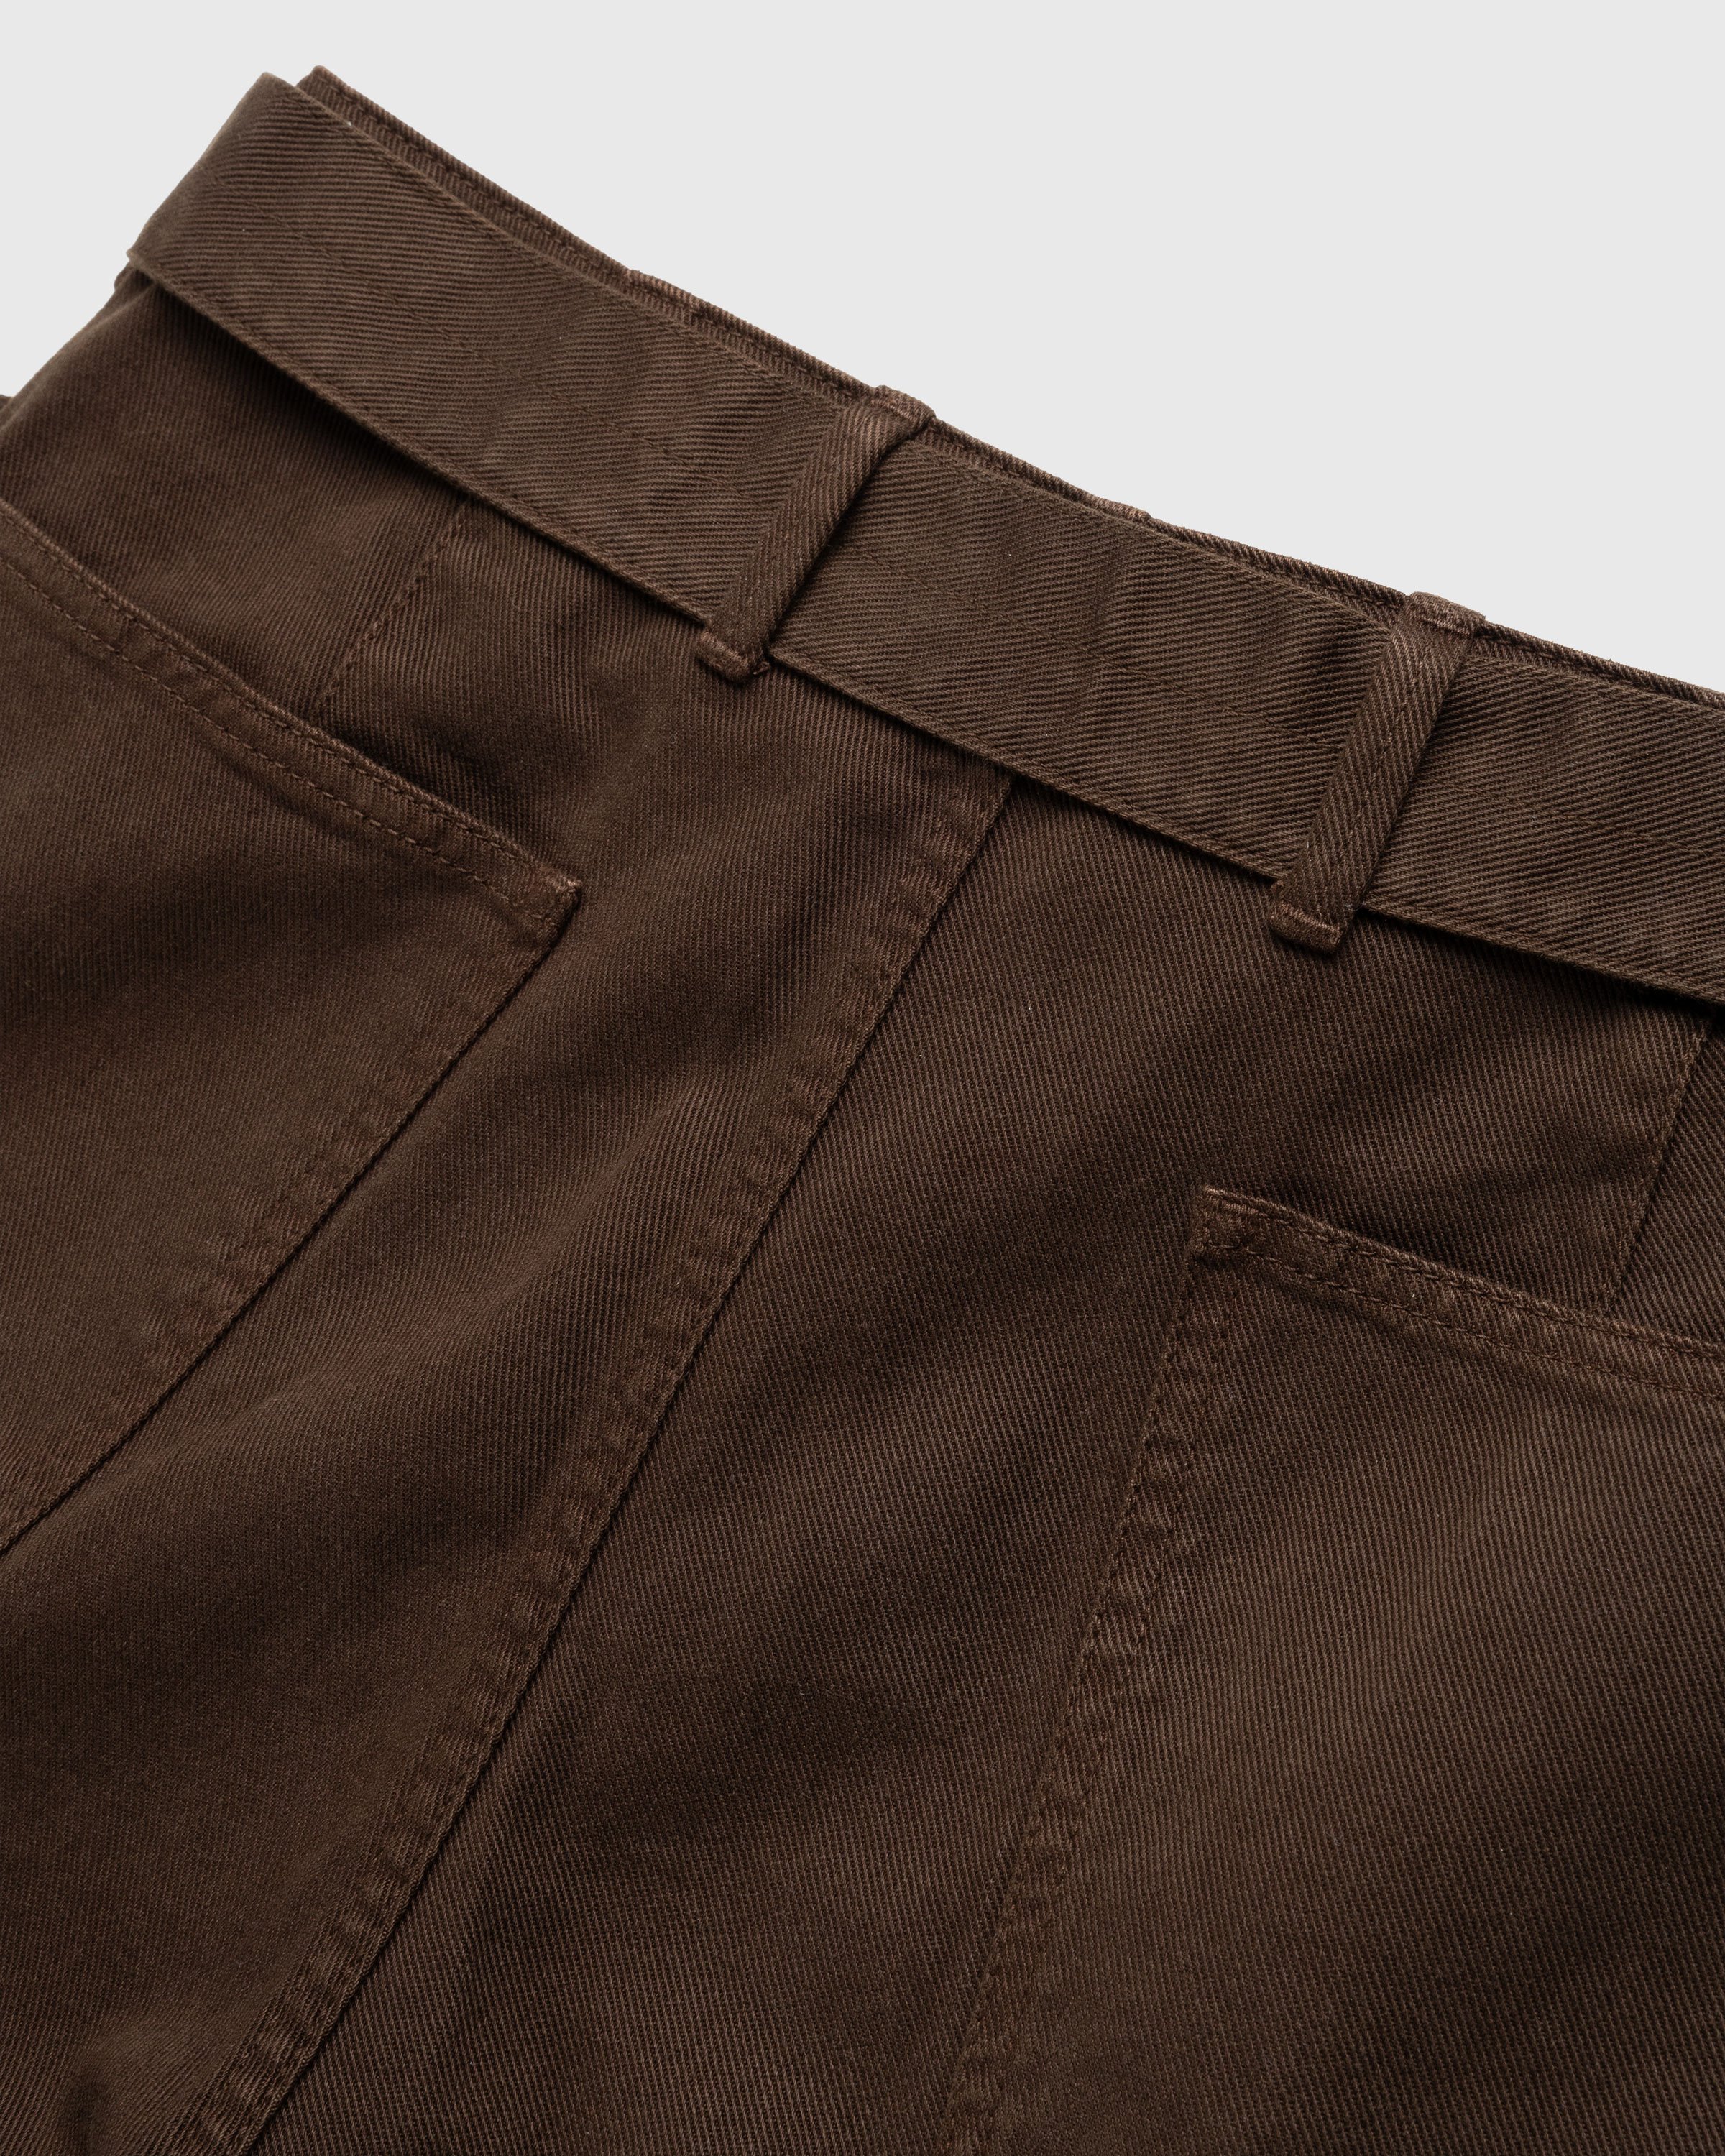 Lemaire - TWISTED BELTED CASUAL PANT - Clothing - Brown - Image 6